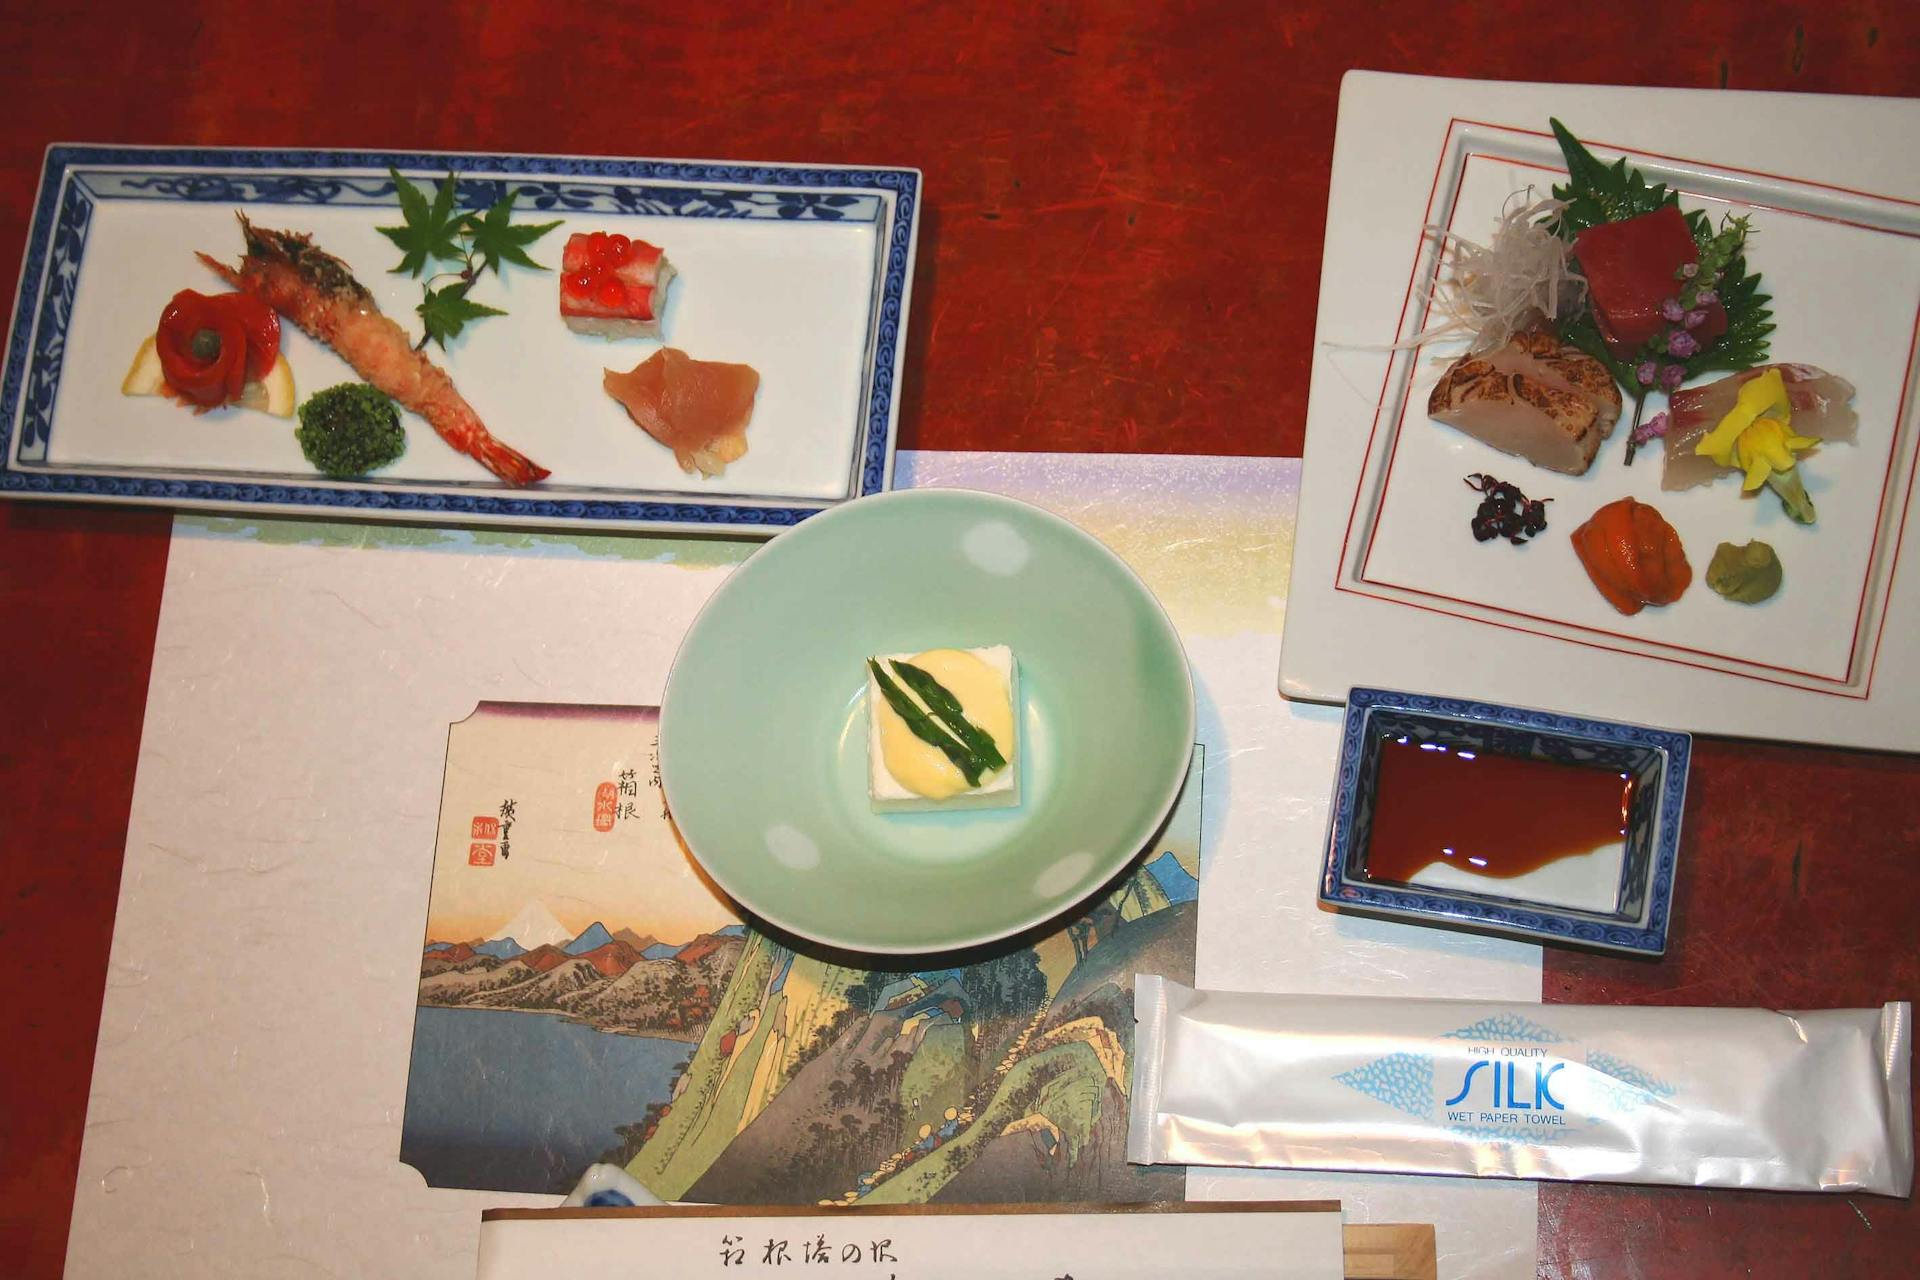 Kaiseki - A 7-course meal at a ryokan in Hakone. Photo source: James Saunders-Wyndham